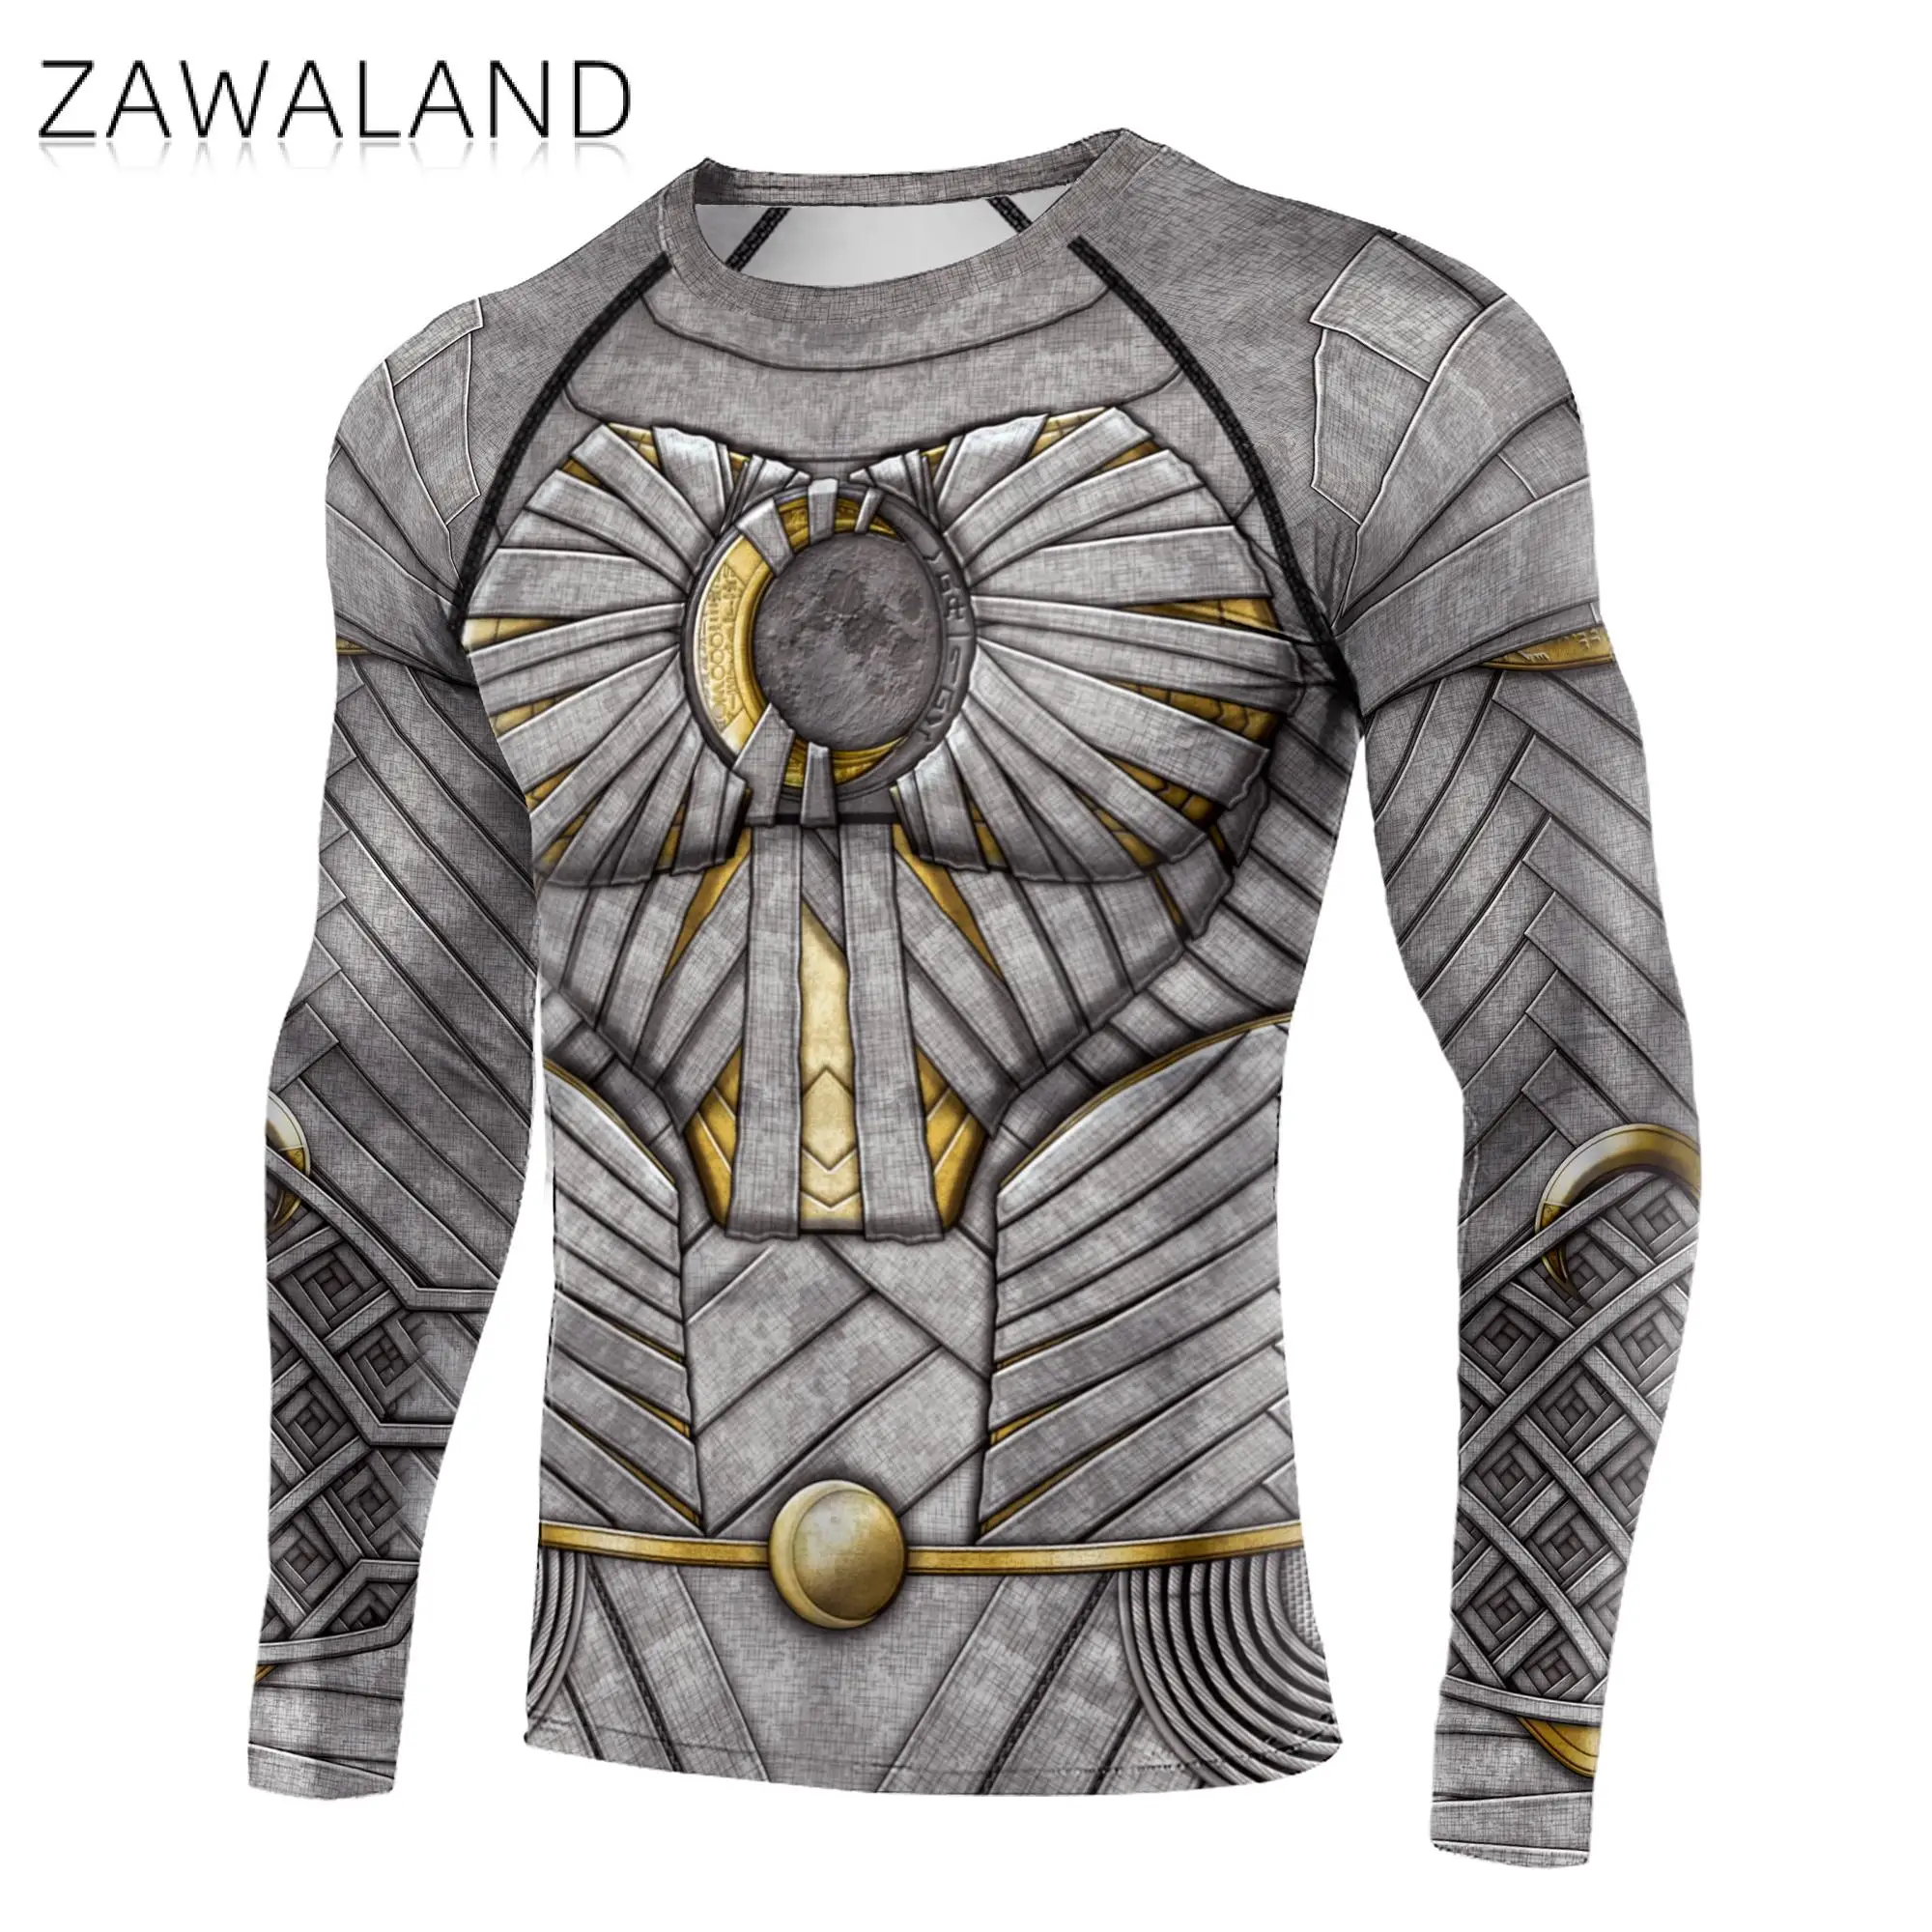 Zawaland Anime movie Moon Knight Cosplay 3D Printed Costume Compression Long Sleeves Workout Gym Sport Shirt Tops Tees